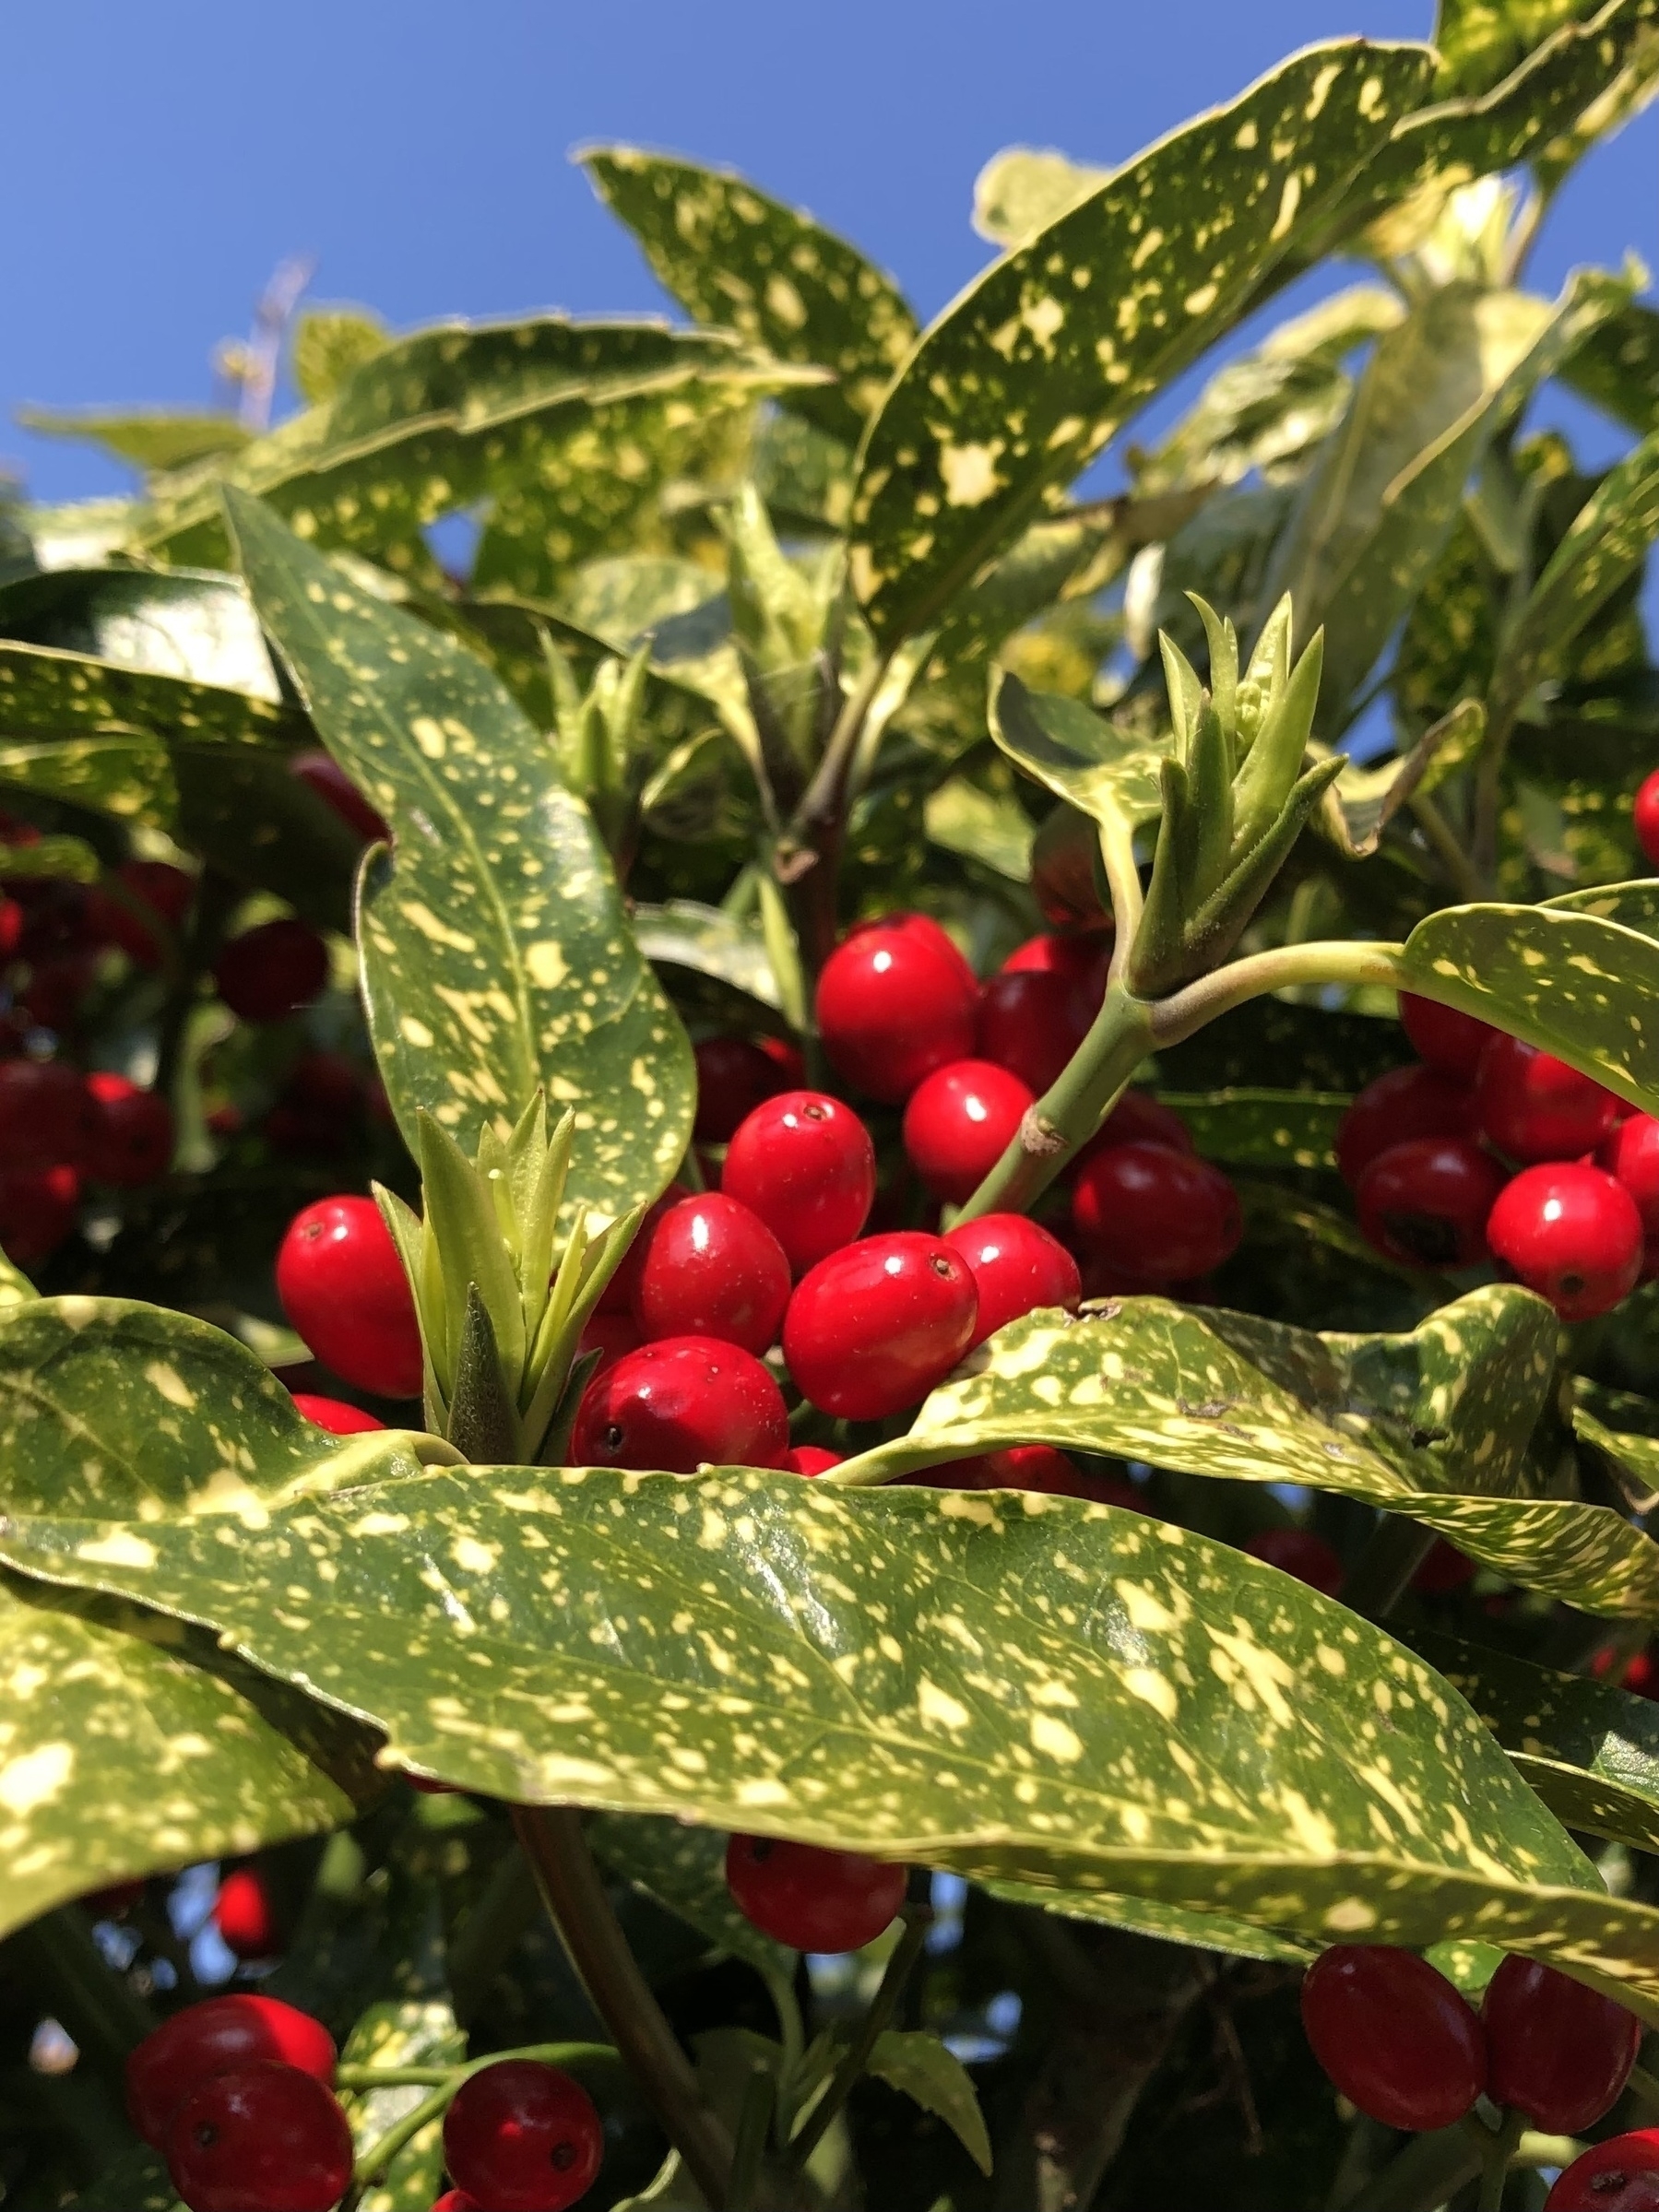 Green leafy plants and red shiny berries in front of a blue sky